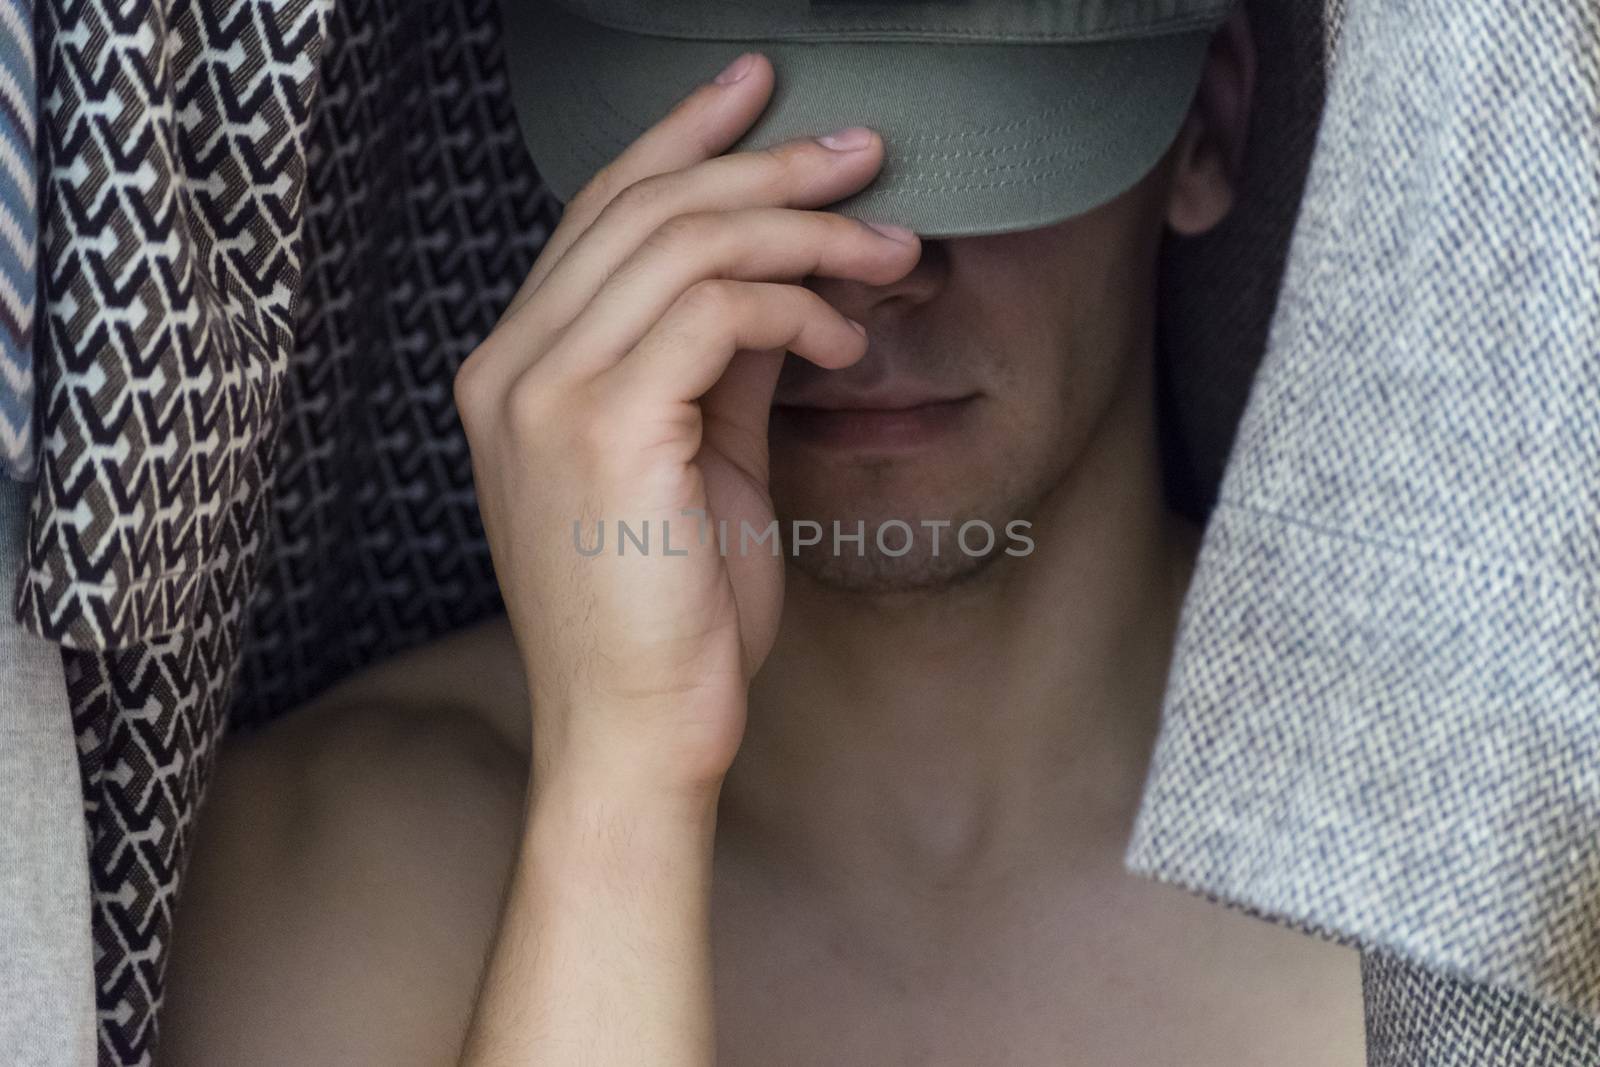 The young man covers his face with hat sitting in the closet women's clothing